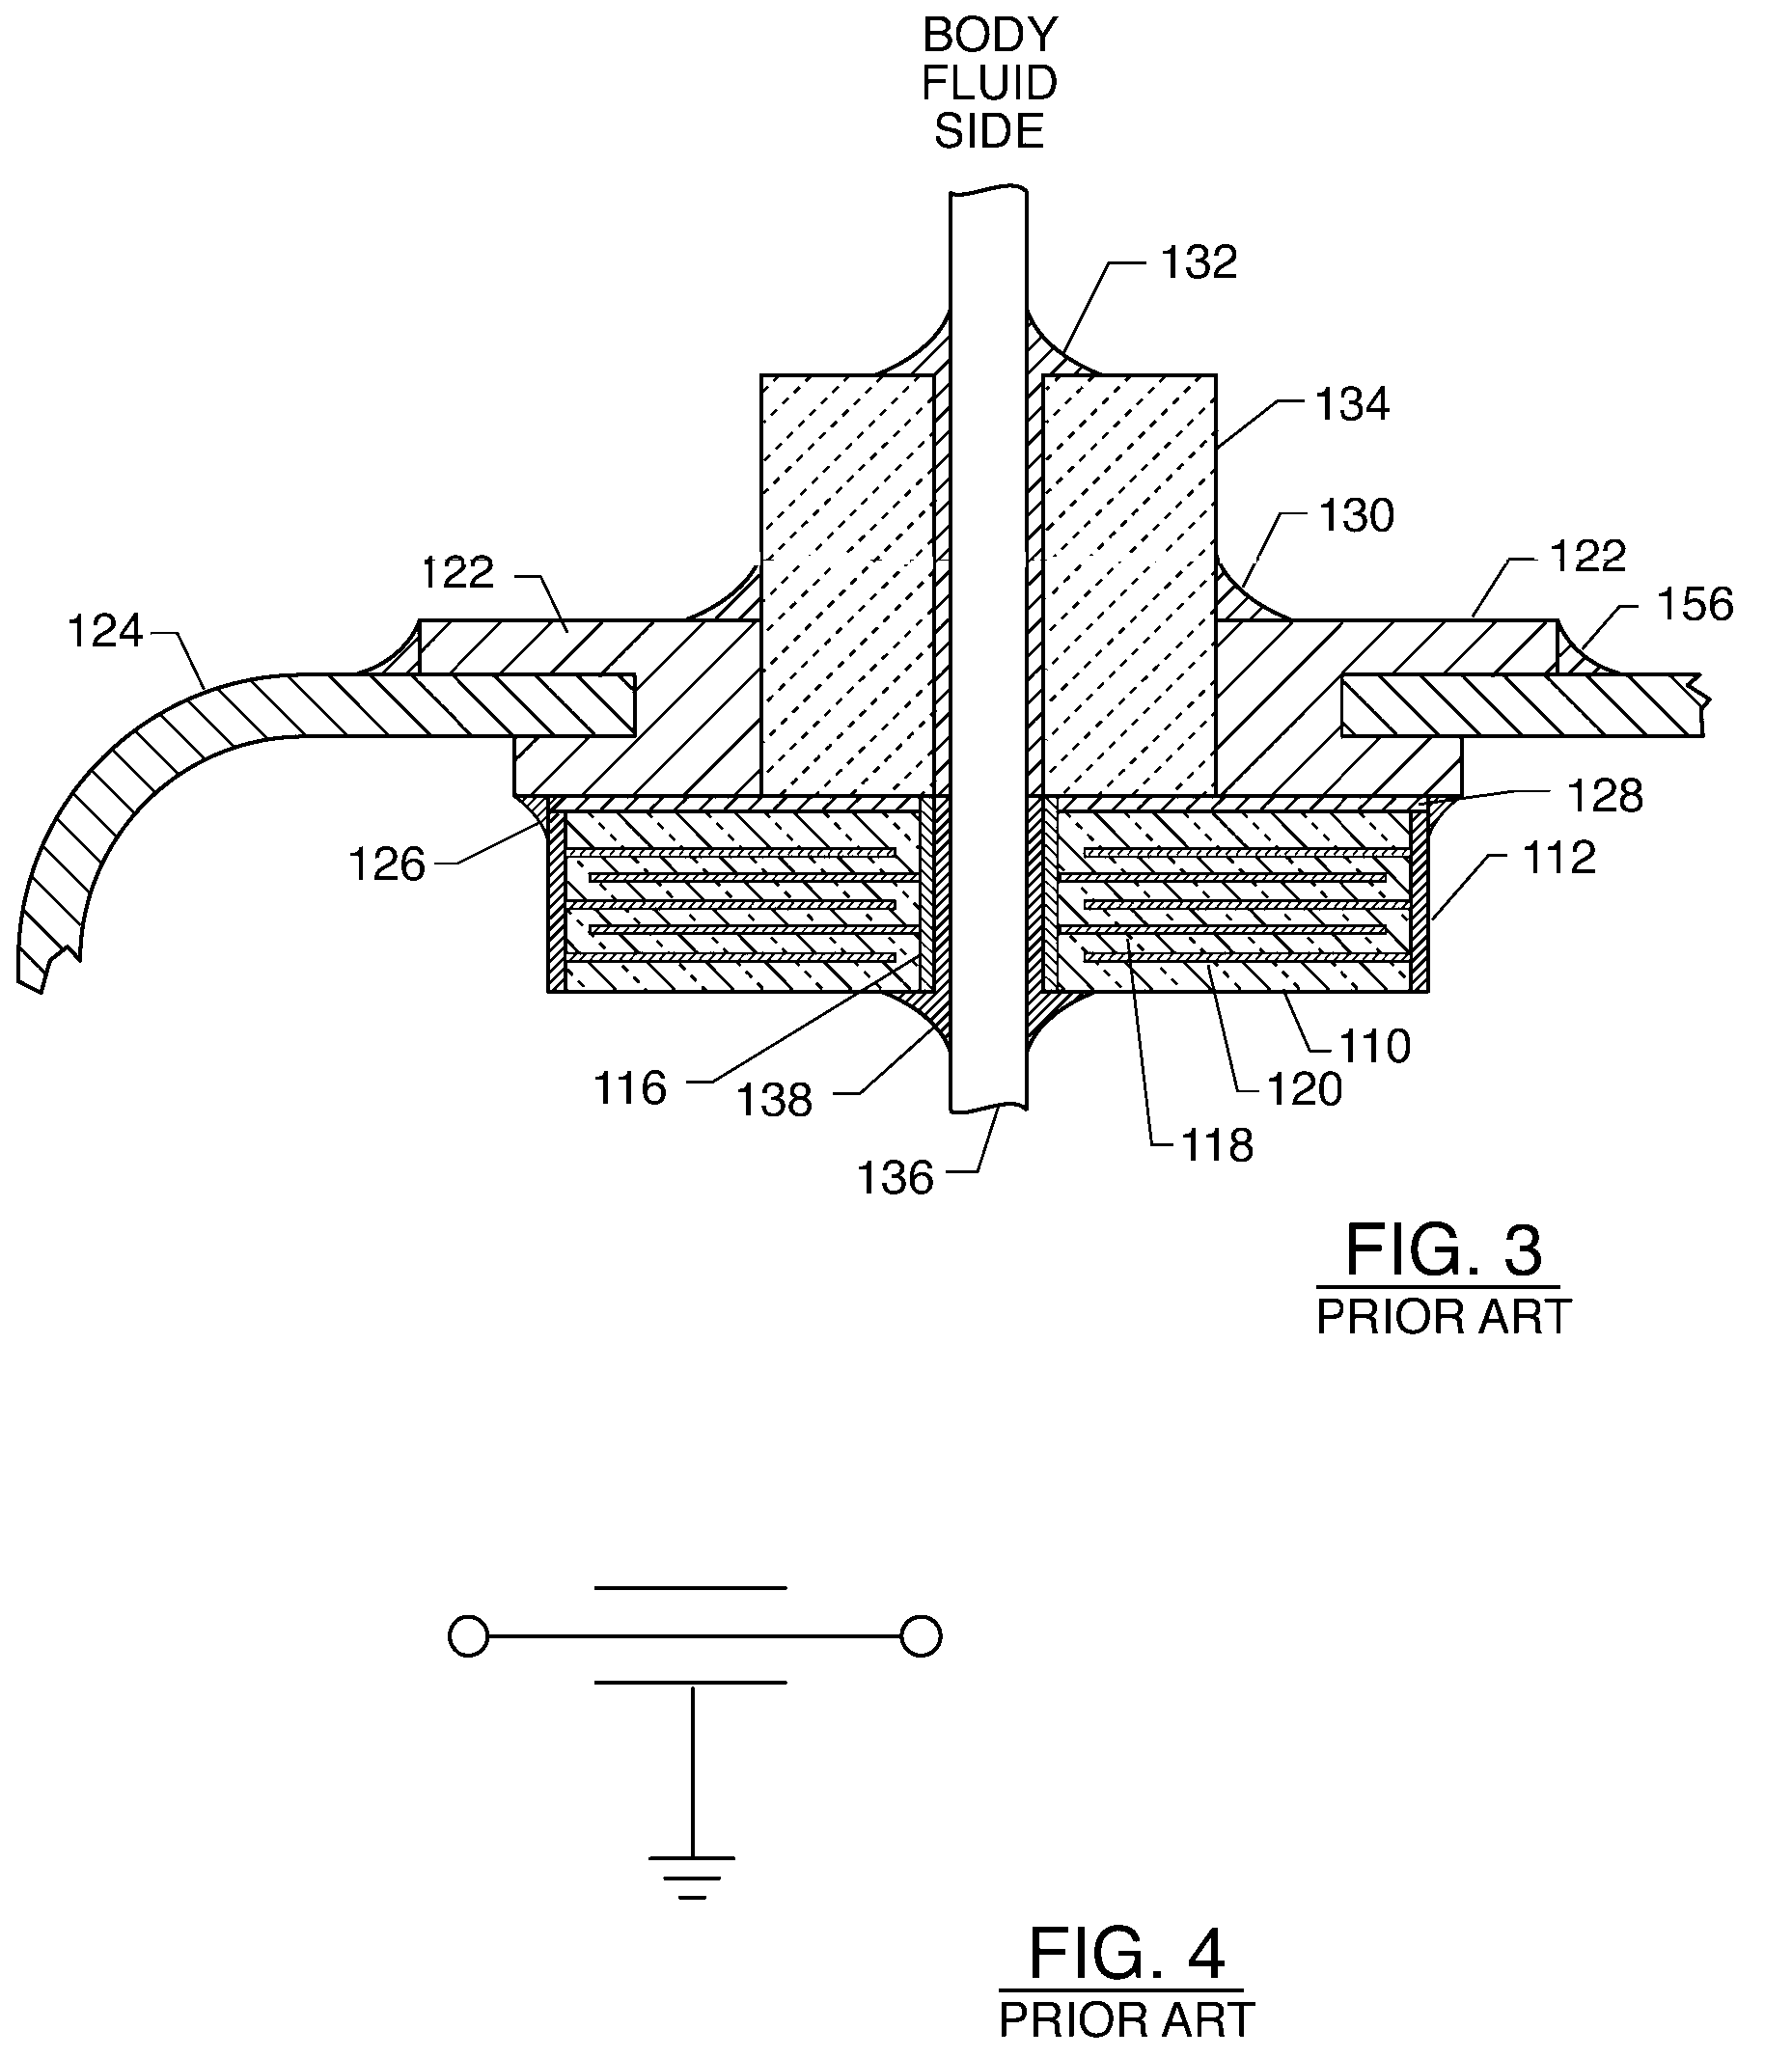 Hermetic feedthrough terminal assembly with wire bond pads for human implant applications